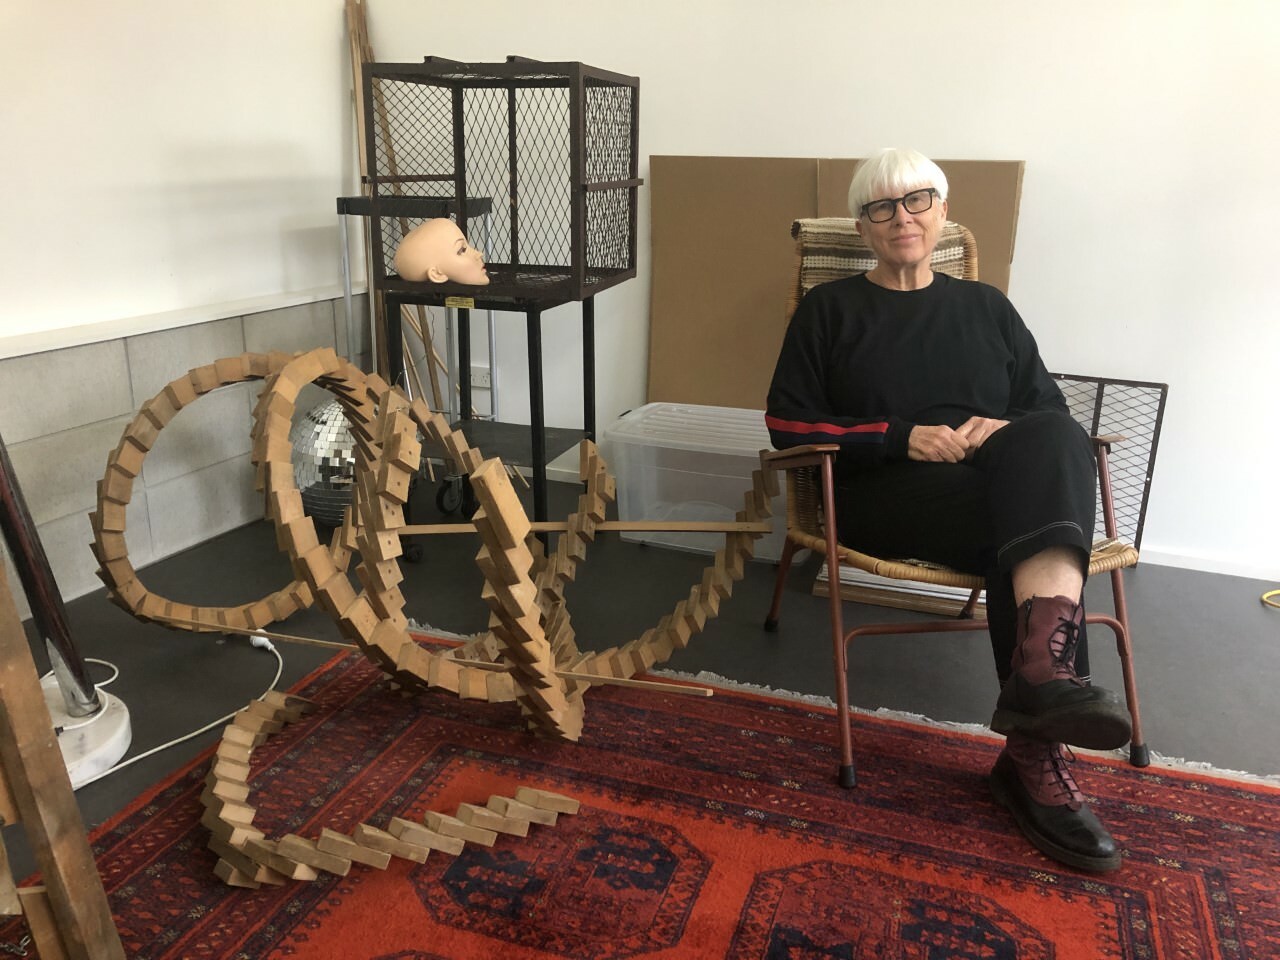 The artist Deborah Rundle sitting in a chair next to a wooden sculpture